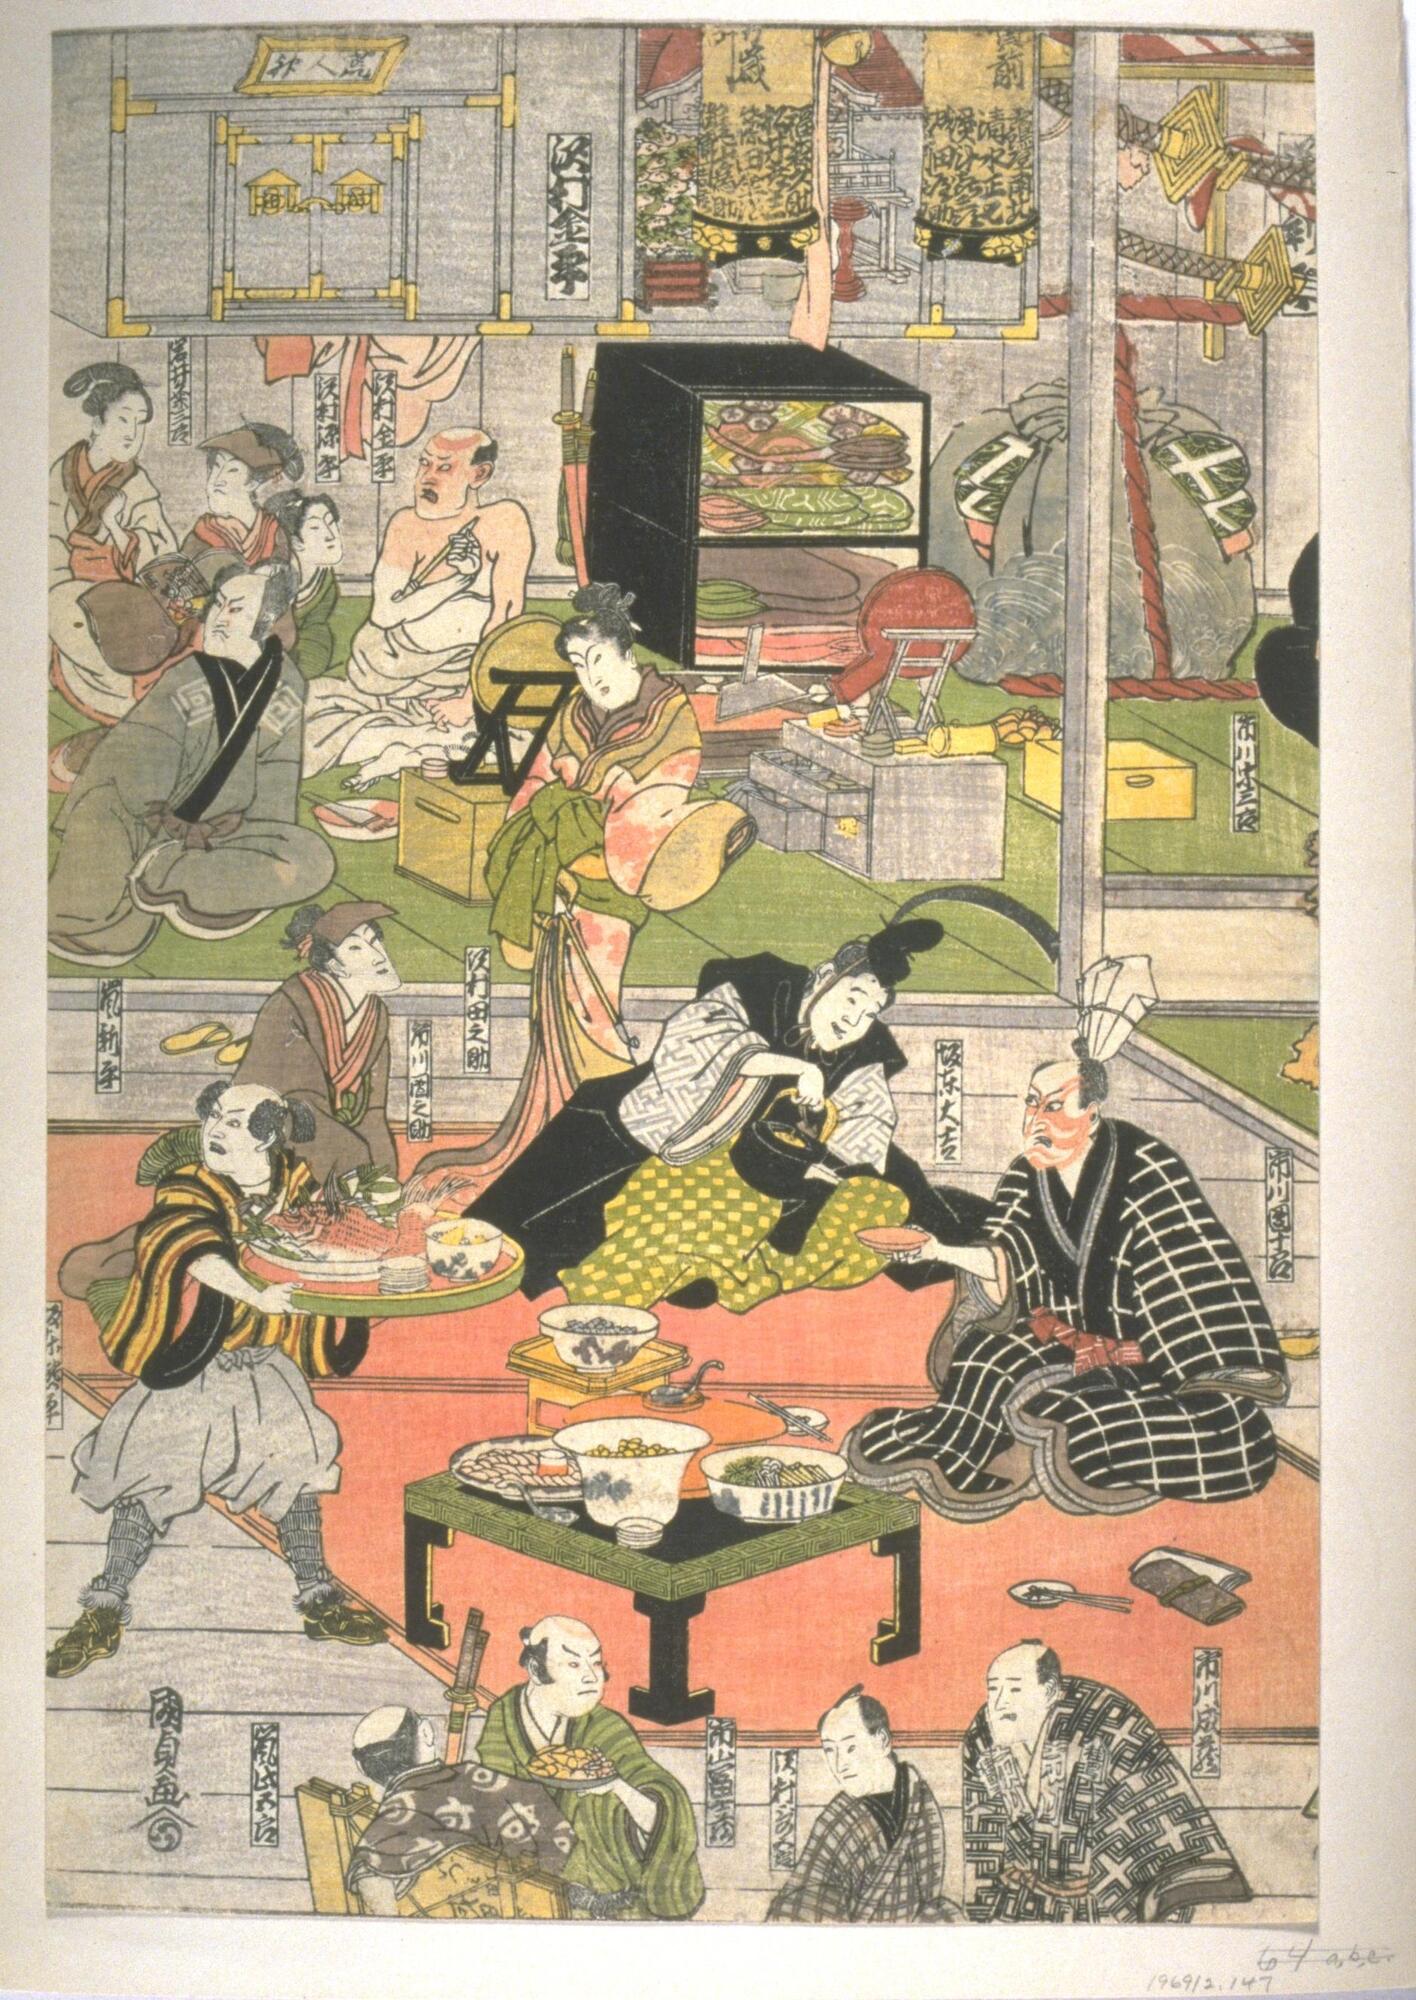 Several men sit on a red mat in the center of the image, surrounded by movement. While they eat, behind them men are taking care of make-up, while in front others are busily moving equipment. Furniture and open boxes add to the business of the scene. Small blocks of text hovering nearby identify each individual.<br /><br />
This is the center panel of a triptych (with 1969/2.146 and 1969/2.148).<br /><br />
Inscriptions: Nishimuraya Yohachi (Publisher's seal); Kunisada ga (Artist's signature)